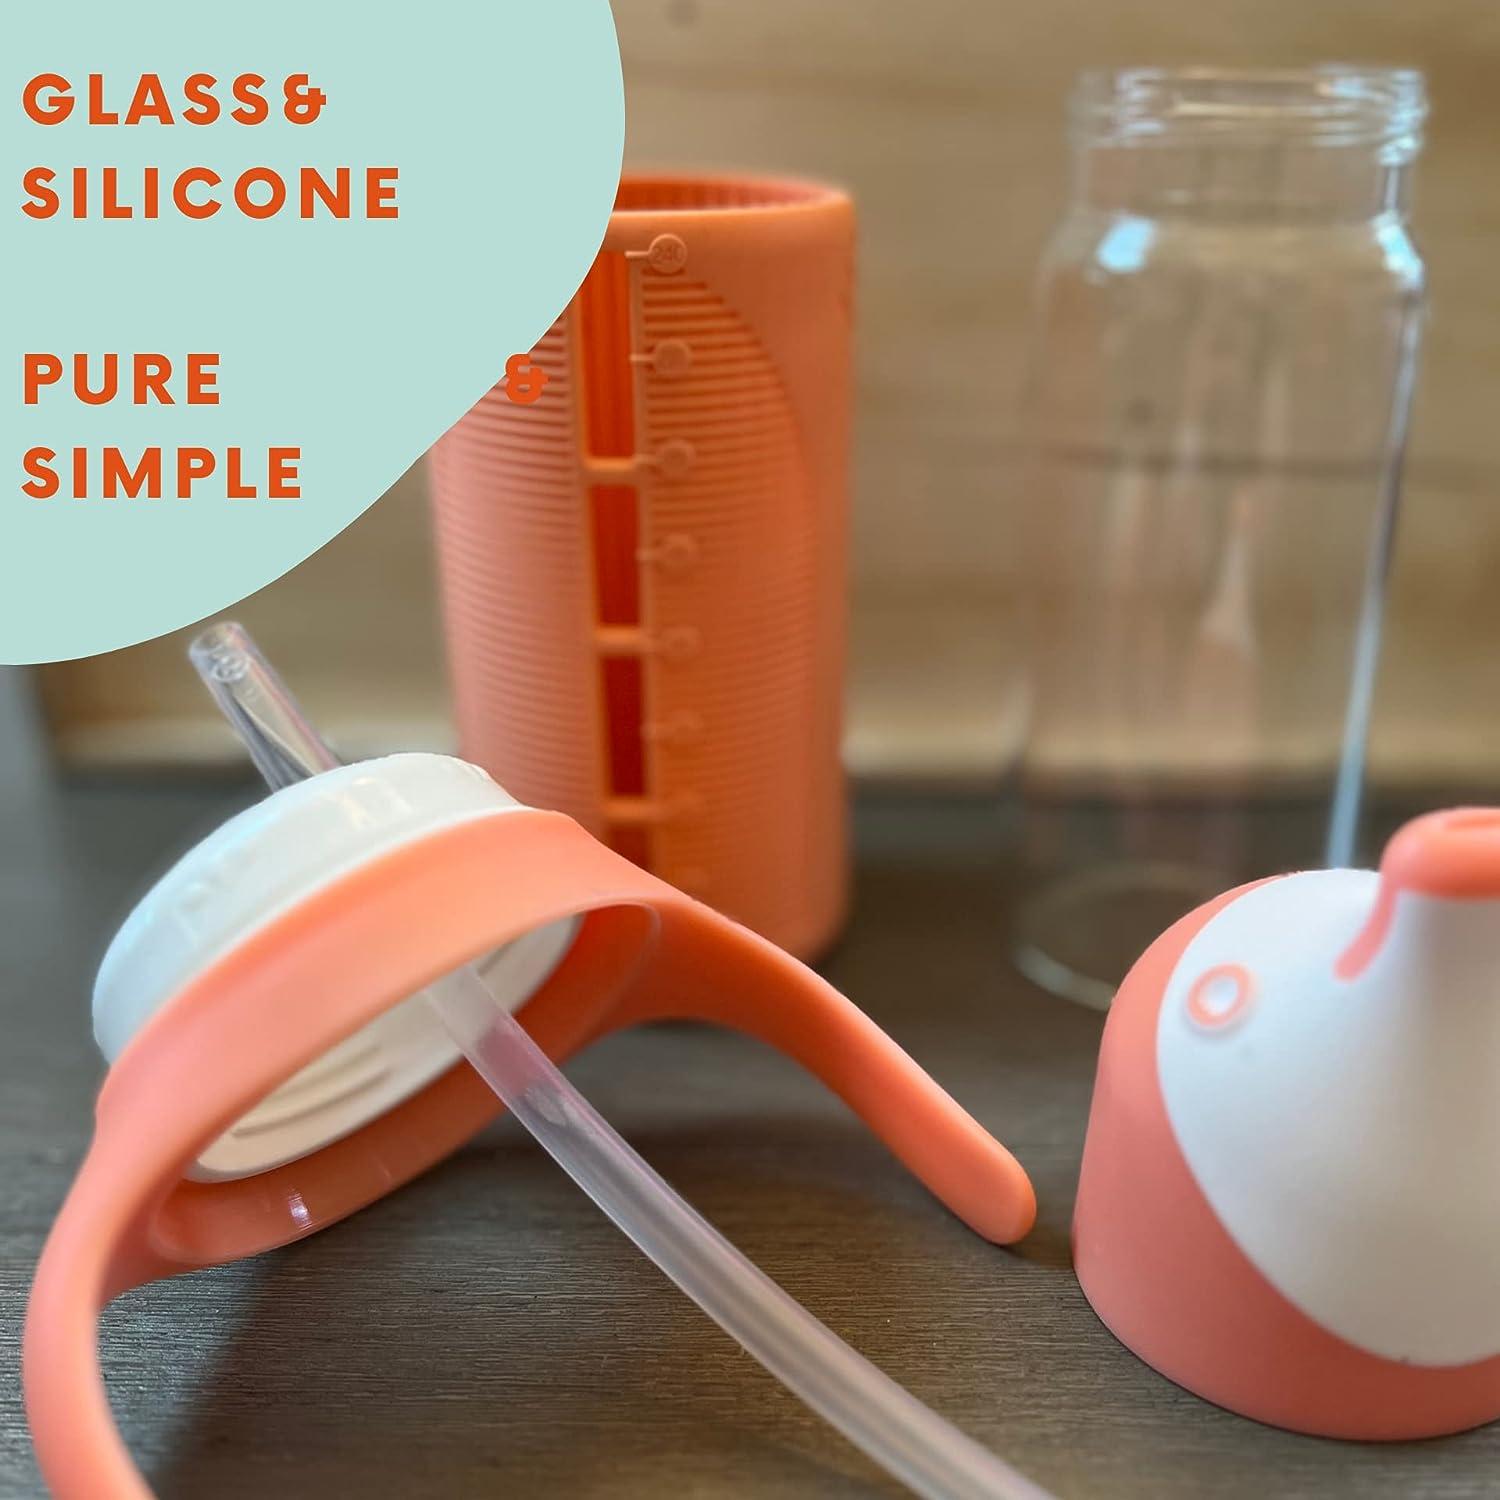 Tabor Place Glass Sippy Cup for Toddlers - The Luca | Spill-Proof | Silicone Straw | Orange | 8 oz | Liquids Never Touch Plastic | Removable Handles